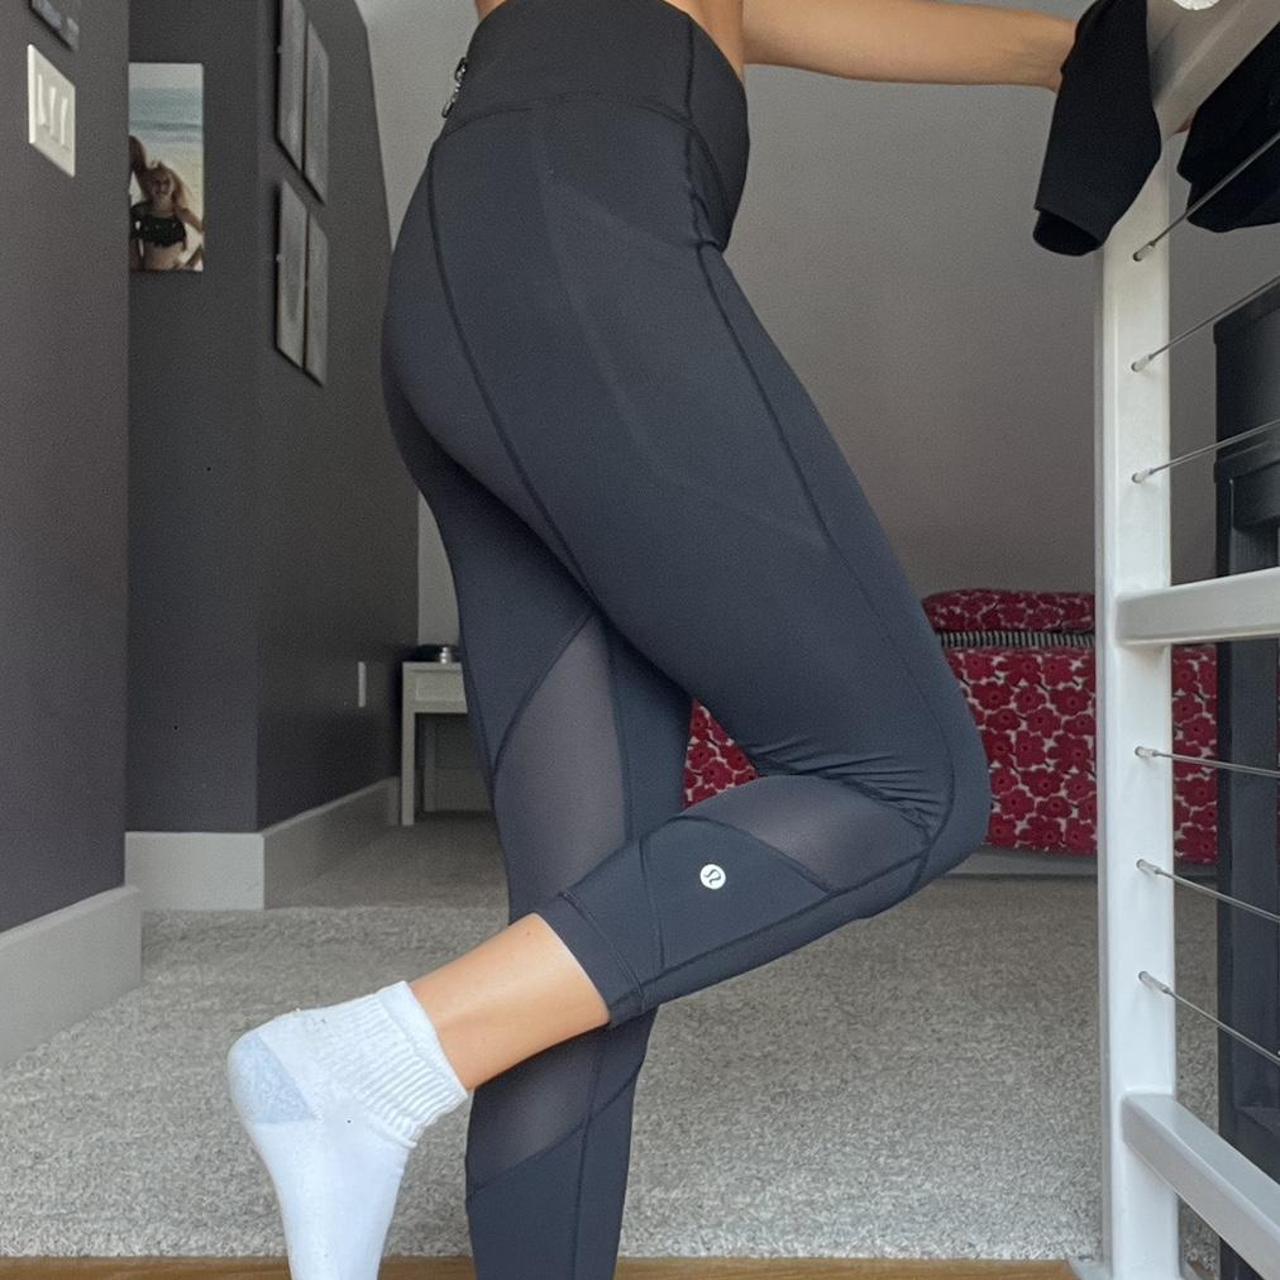 Lululemon cropped leggings with size pockets and - Depop